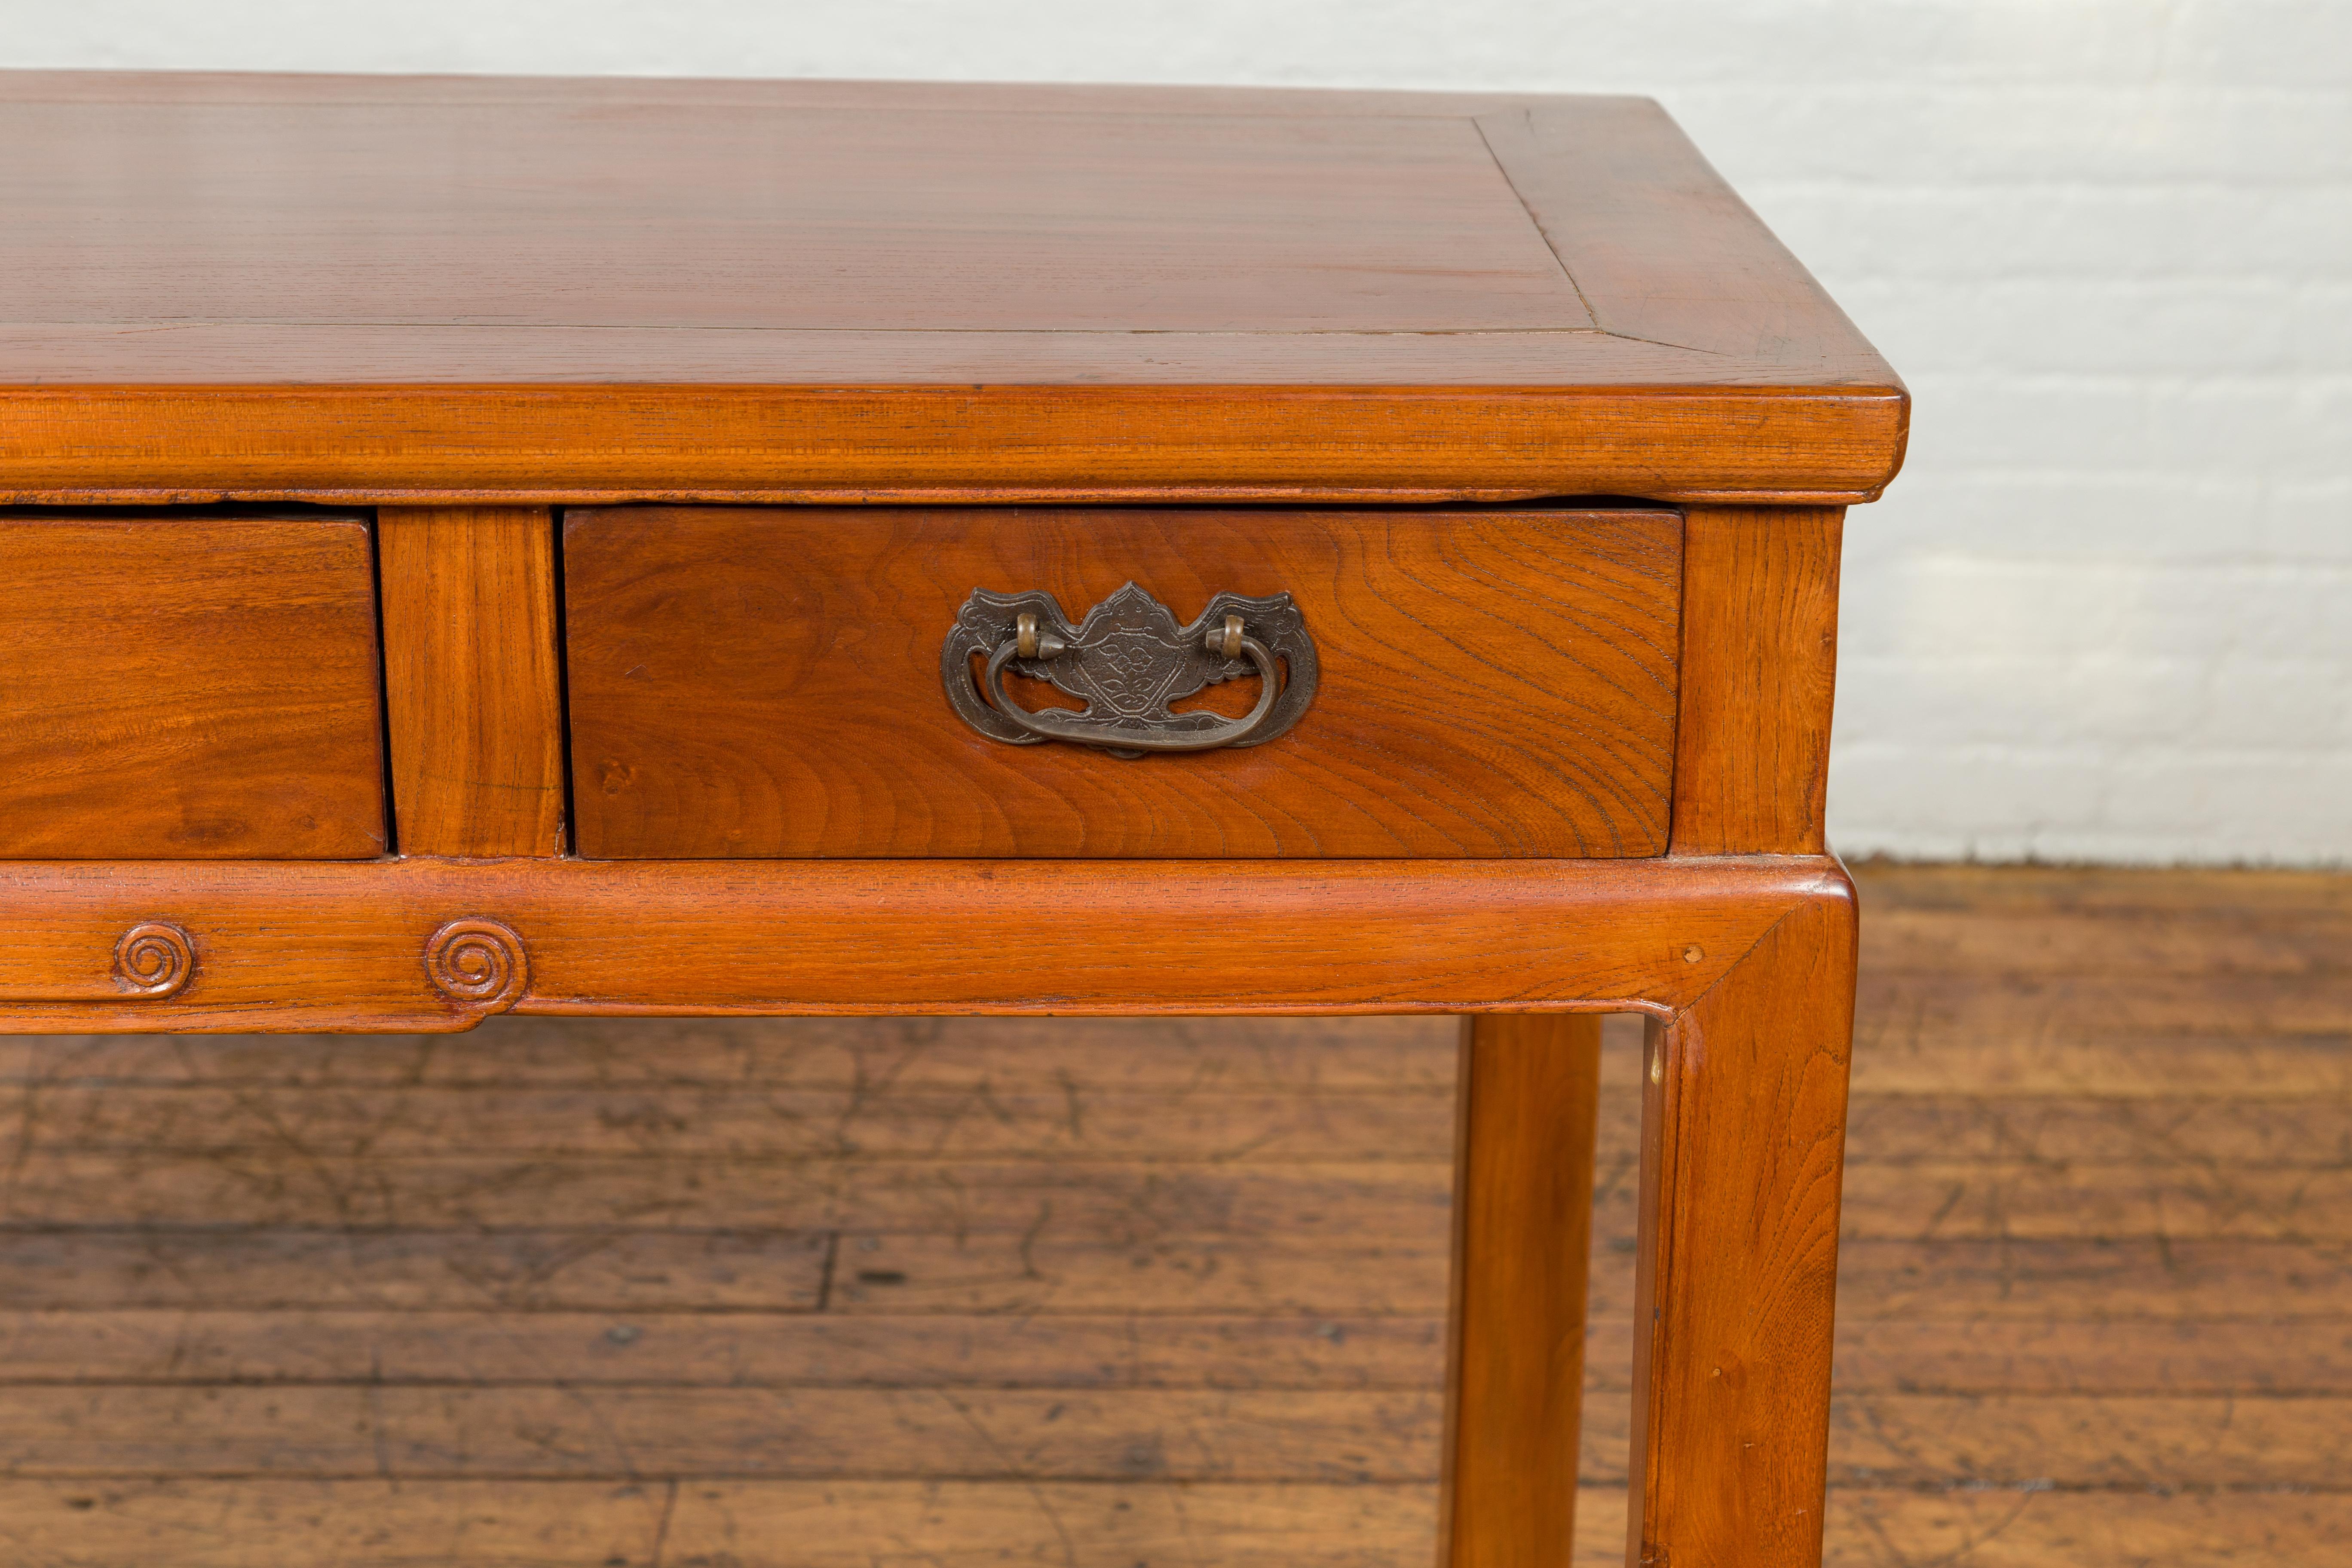 Vintage Chinese Elm Desk with Three Drawers, Iron Hardware and Swirling Motifs In Good Condition For Sale In Yonkers, NY